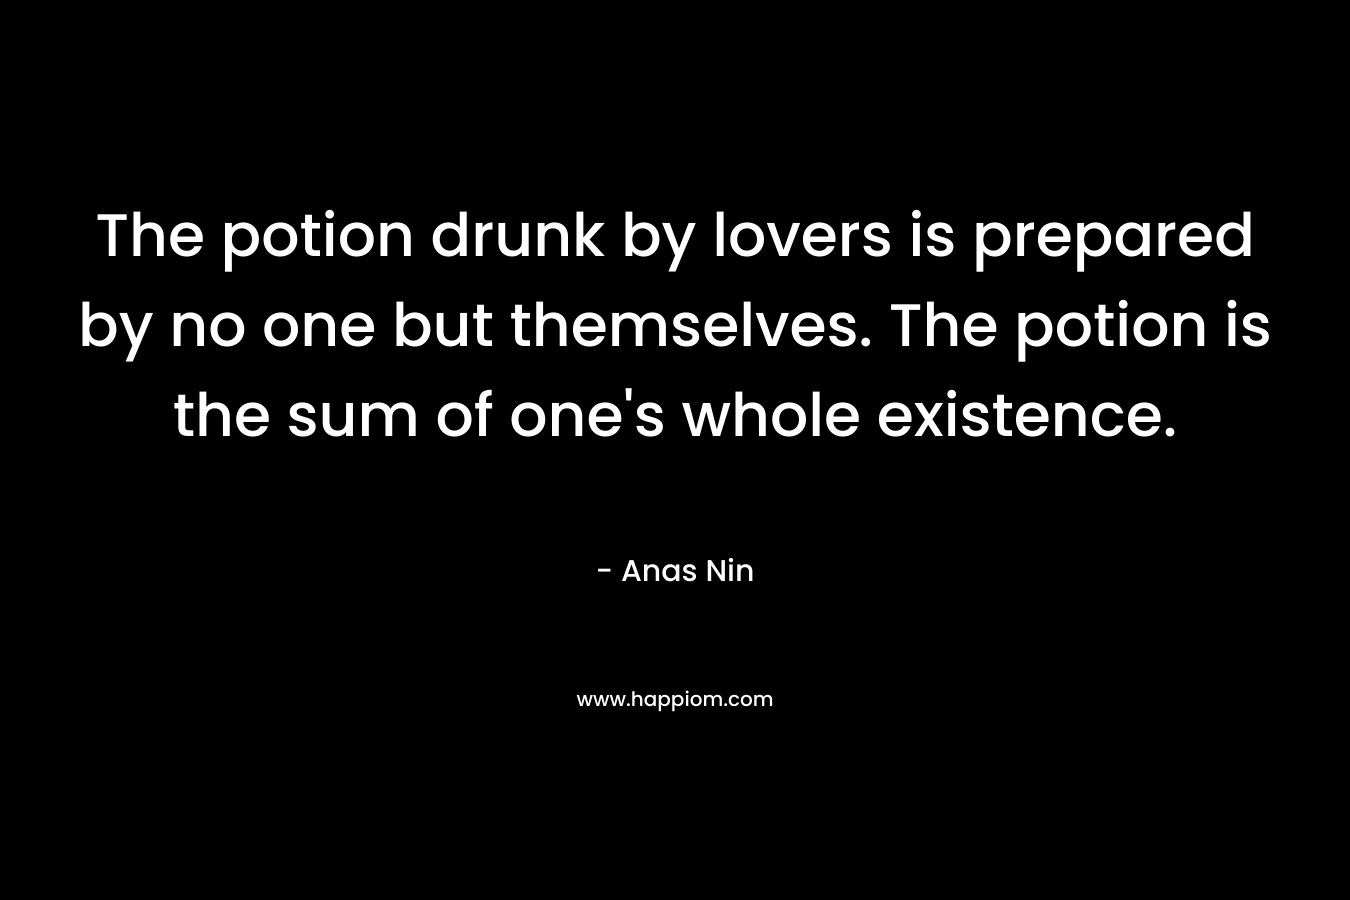 The potion drunk by lovers is prepared by no one but themselves. The potion is the sum of one's whole existence.